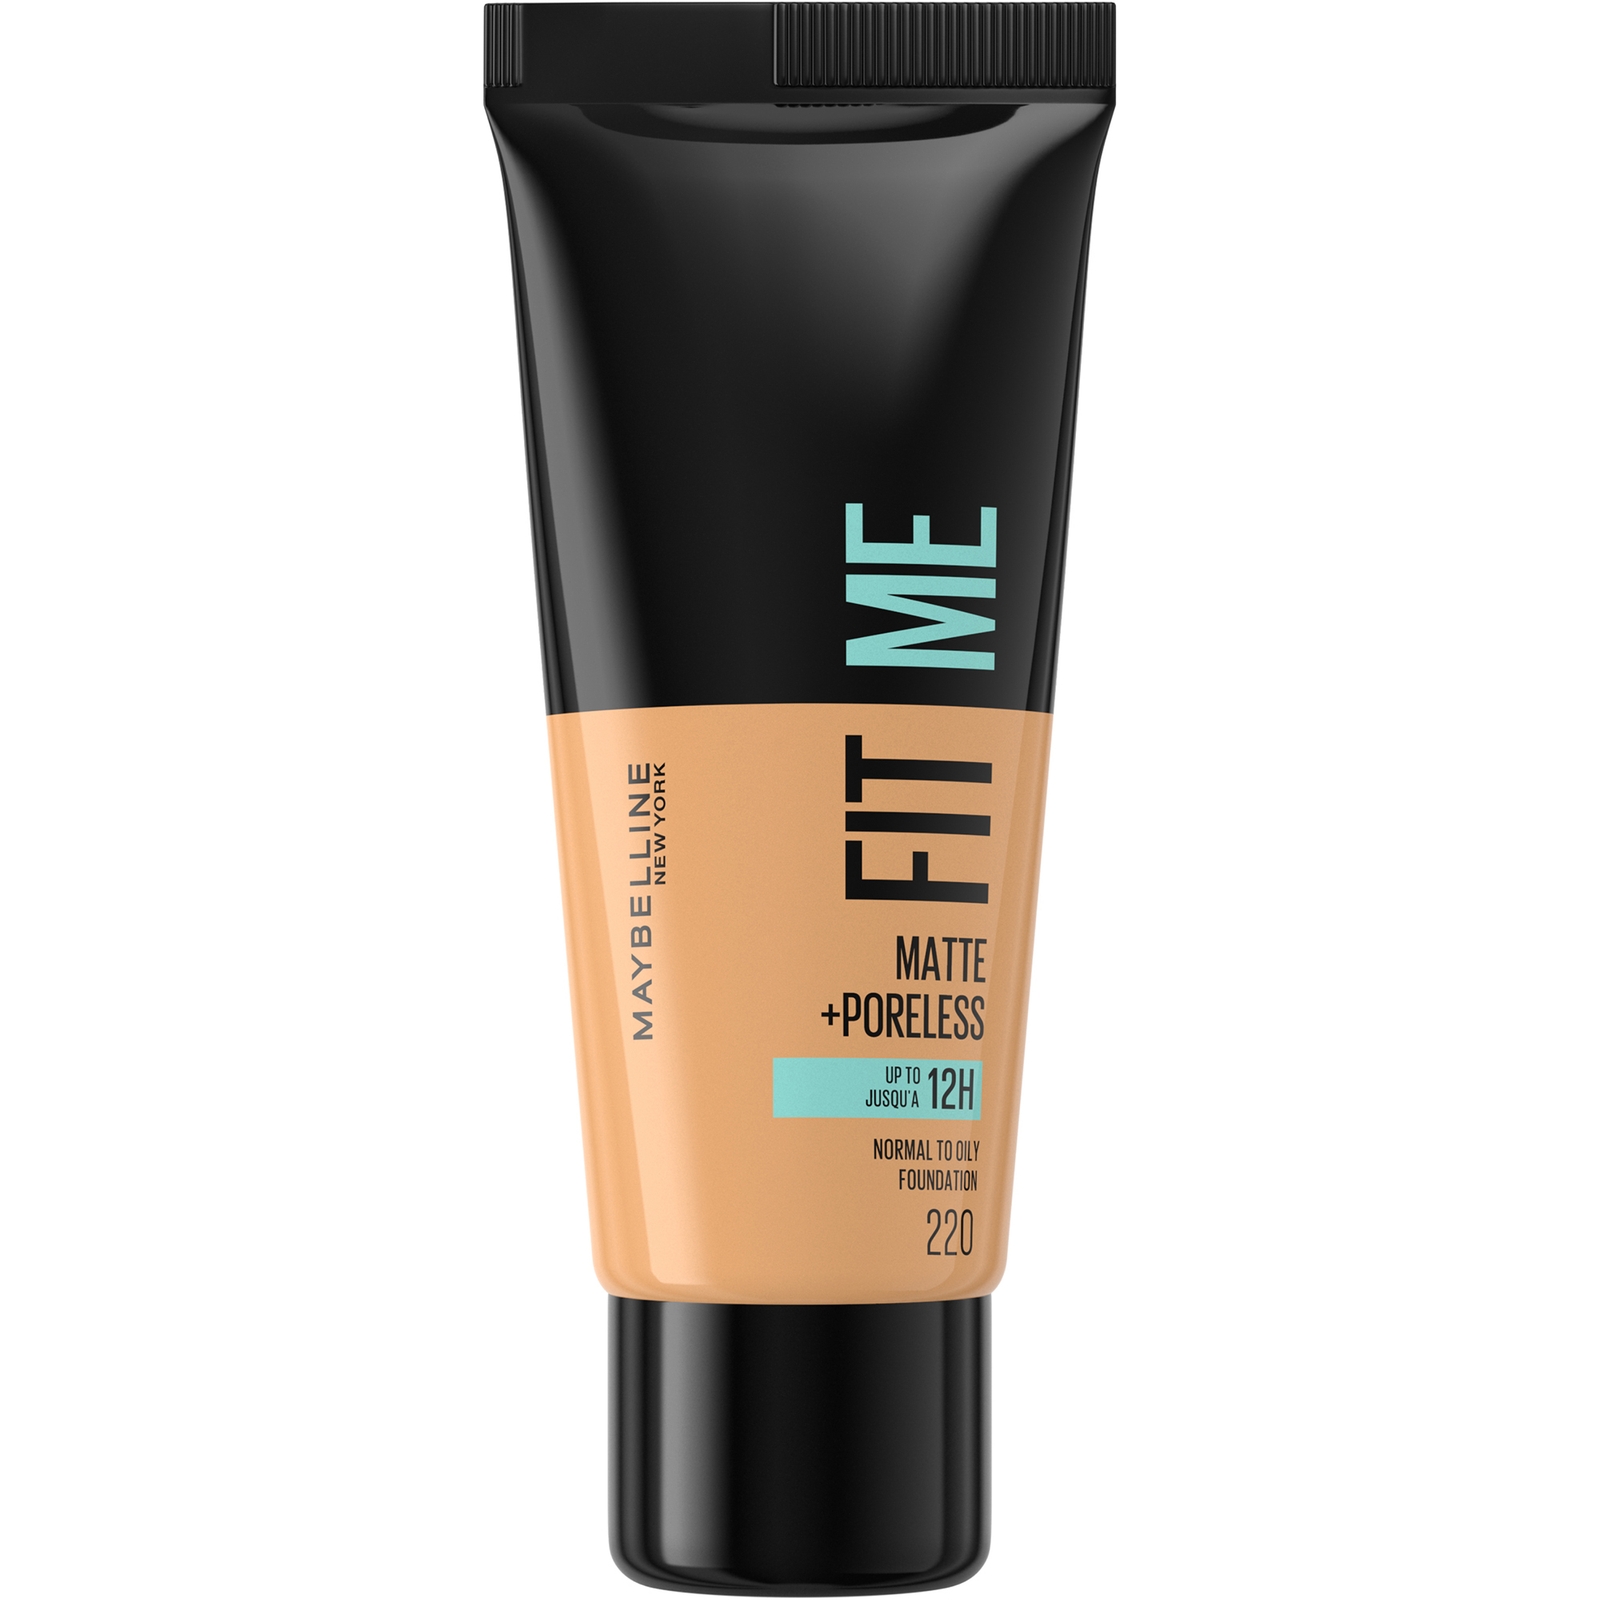 Maybelline Fit Me! Matte and Poreless Foundation 30ml (Various Shades) - 220 Natural Beige